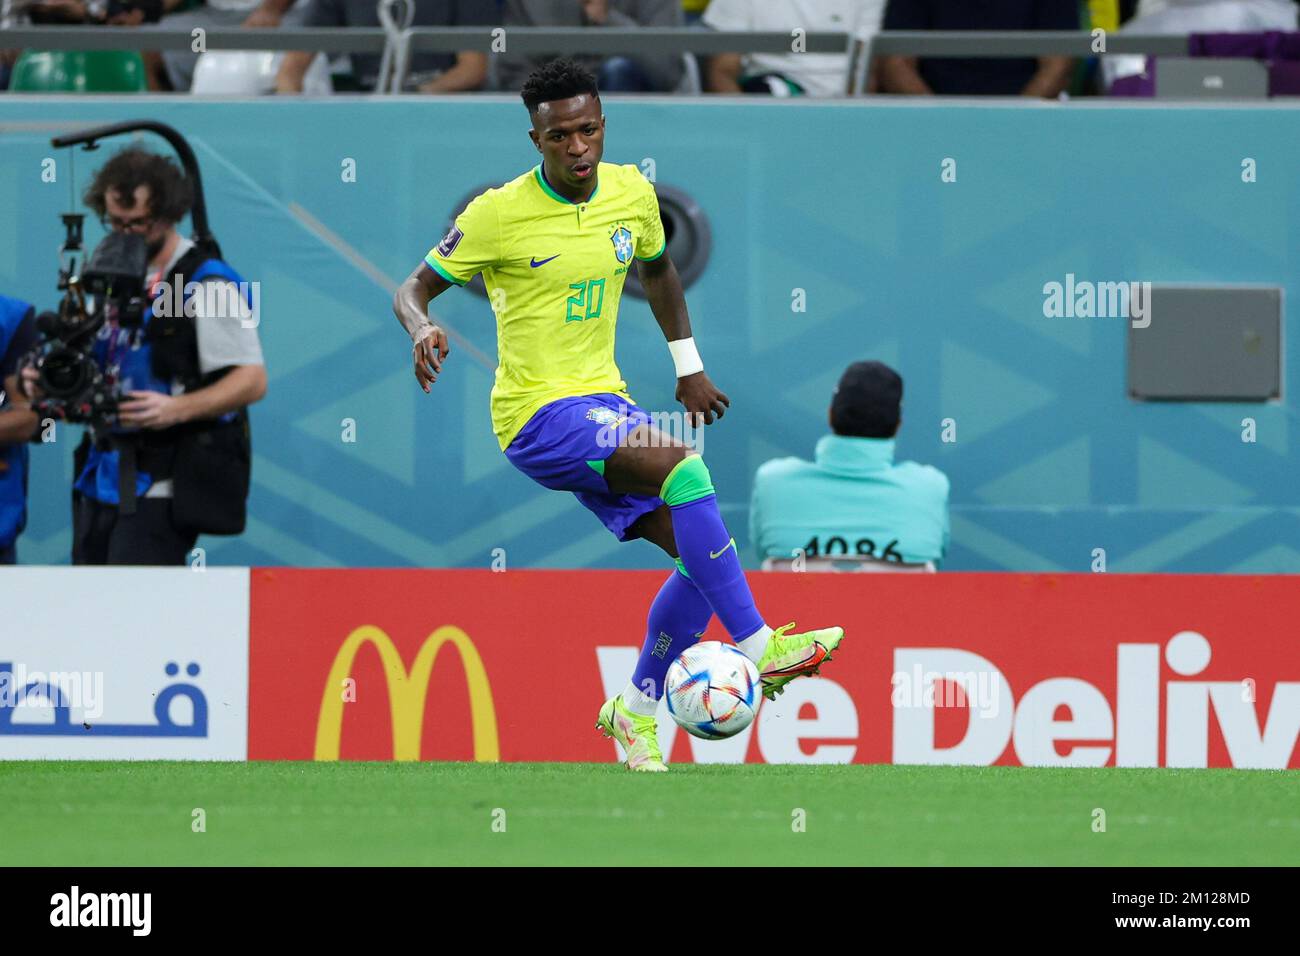 Doha, Qatar. 09th Dec, 2022. Vinicius Junior Brazil player during a match against Croatia valid for the quarterfinals of the FIFA World Cup in Qatar at Education City Stadium in Doha, Qatar. December 9, 2022 Photo:William Volcov Credit: Brazil Photo Press/Alamy Live News Stock Photo